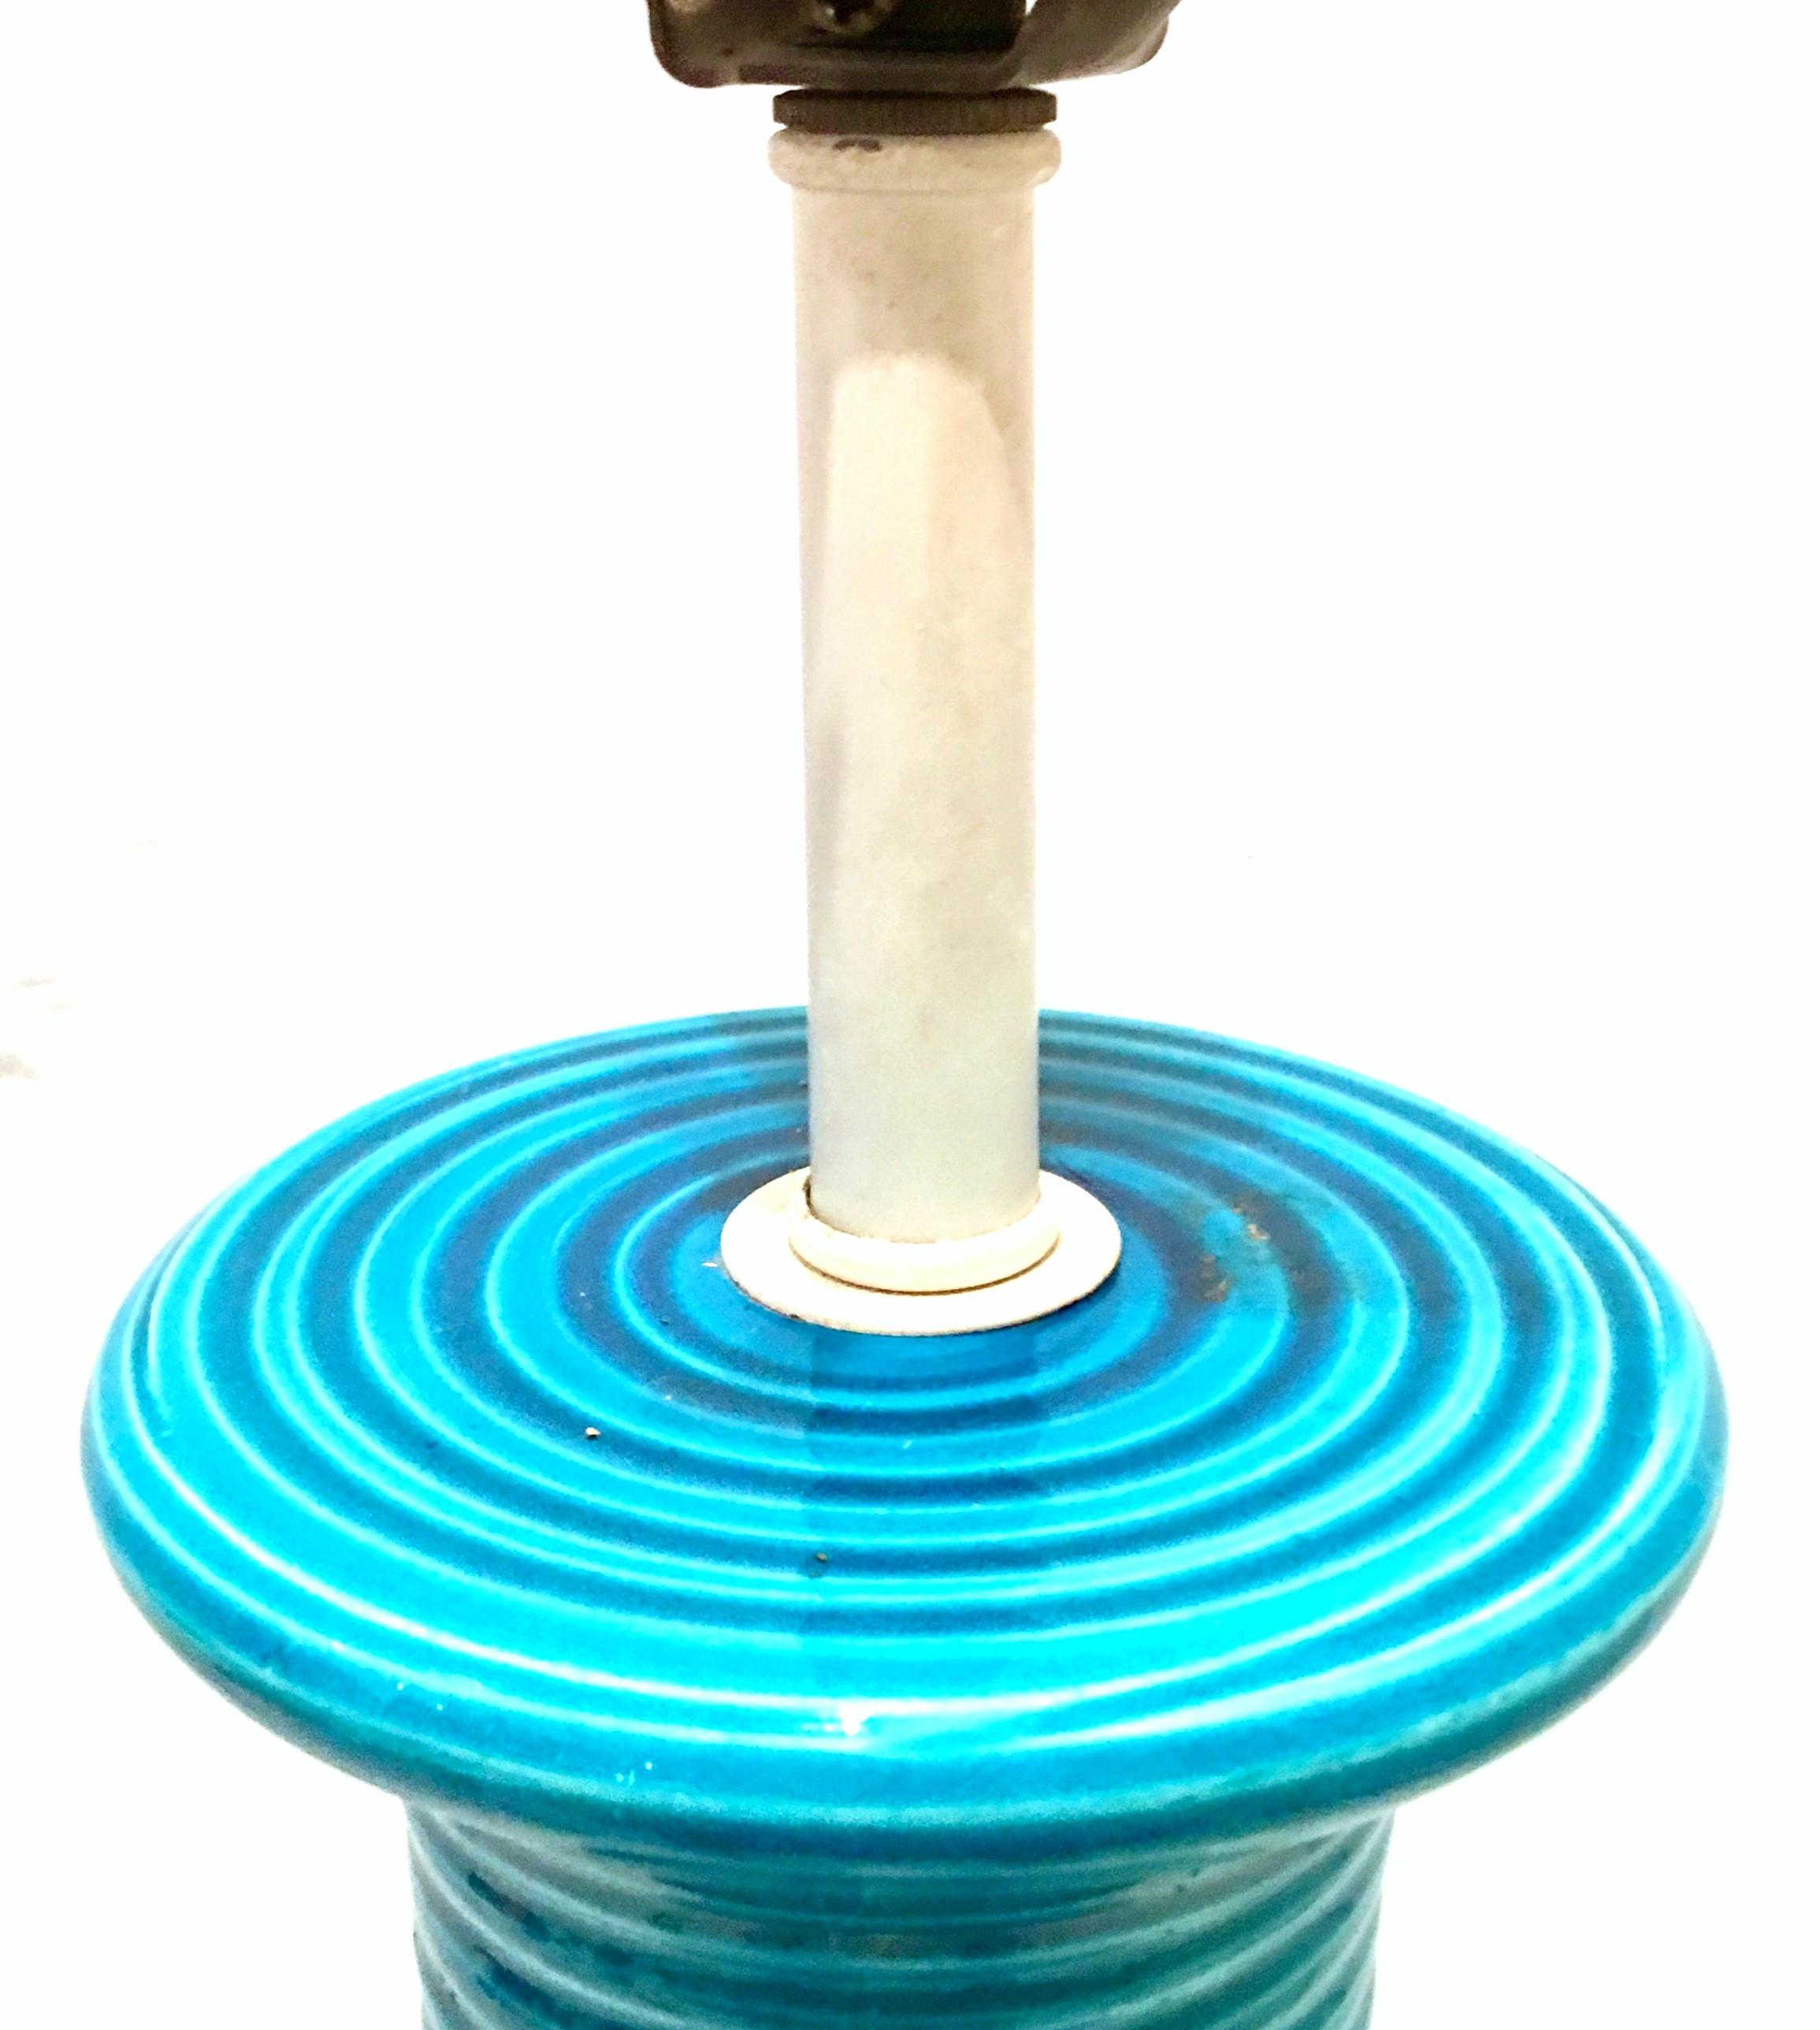 1960s Italian Cerulean Blue and Black Ceramic Glaze Pottery Lamp by, Bitossi For Sale 6